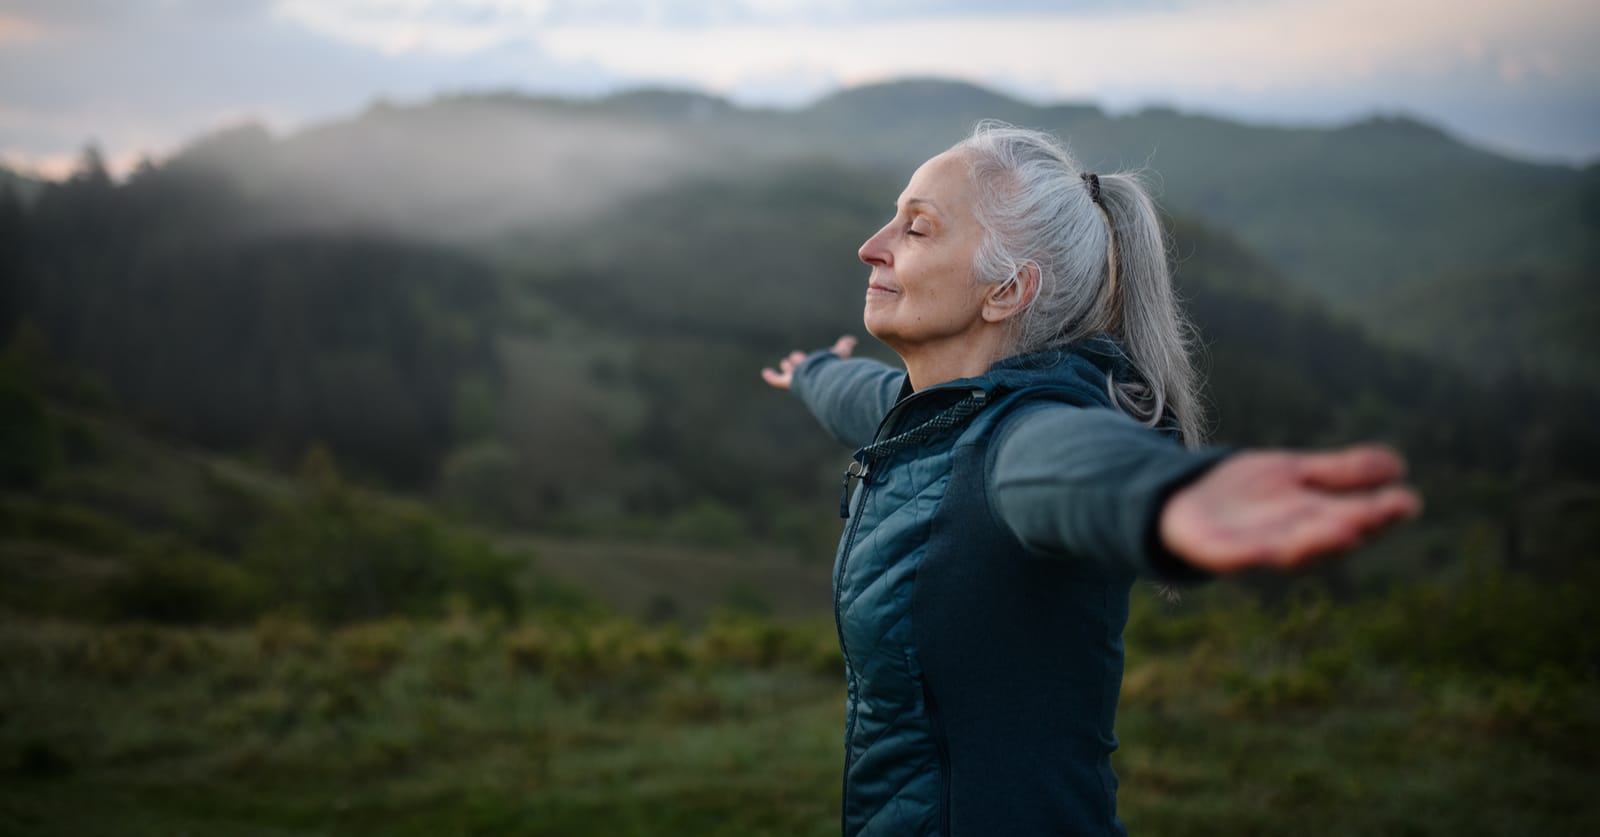 Photo of an older woman doing a breathing exercise with a scenic backdrop. Her arms are raised, eyes closed, and head tilted up.